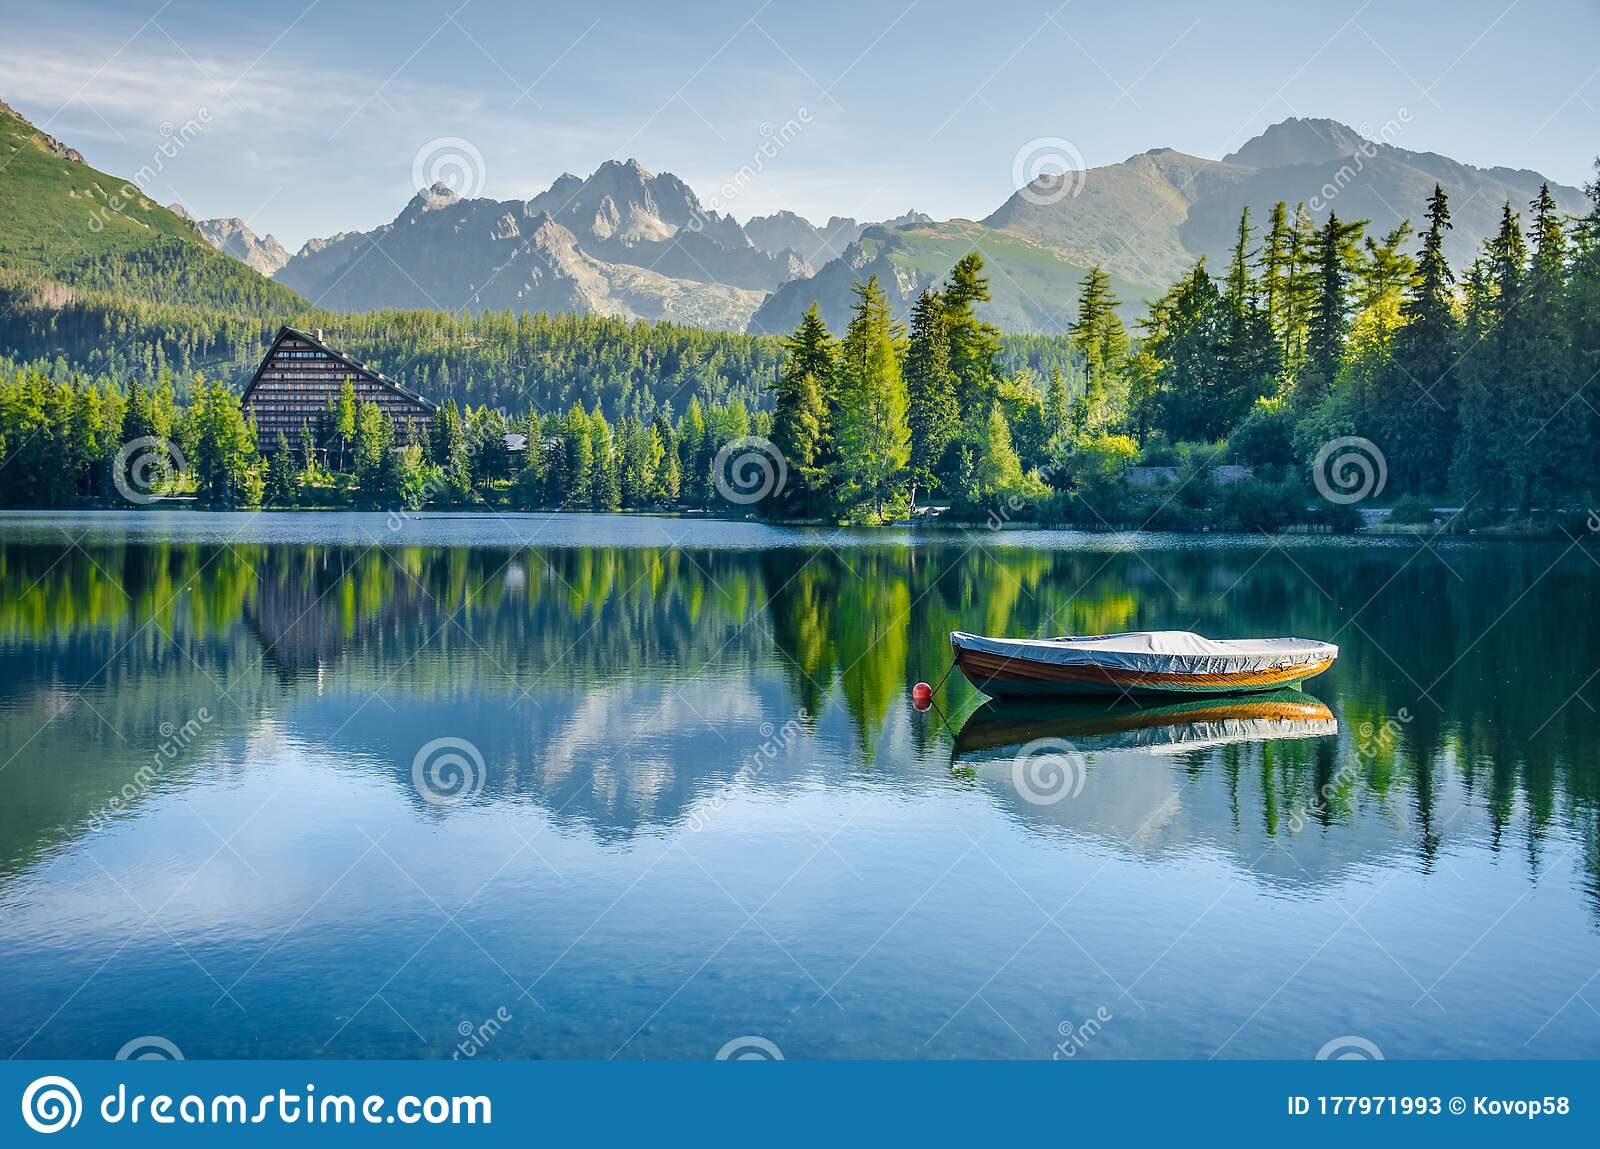 Alone boat on empty mountain lake strbske pleso in national park high tatra slovakia europe original wallpaper with soft colors stock image